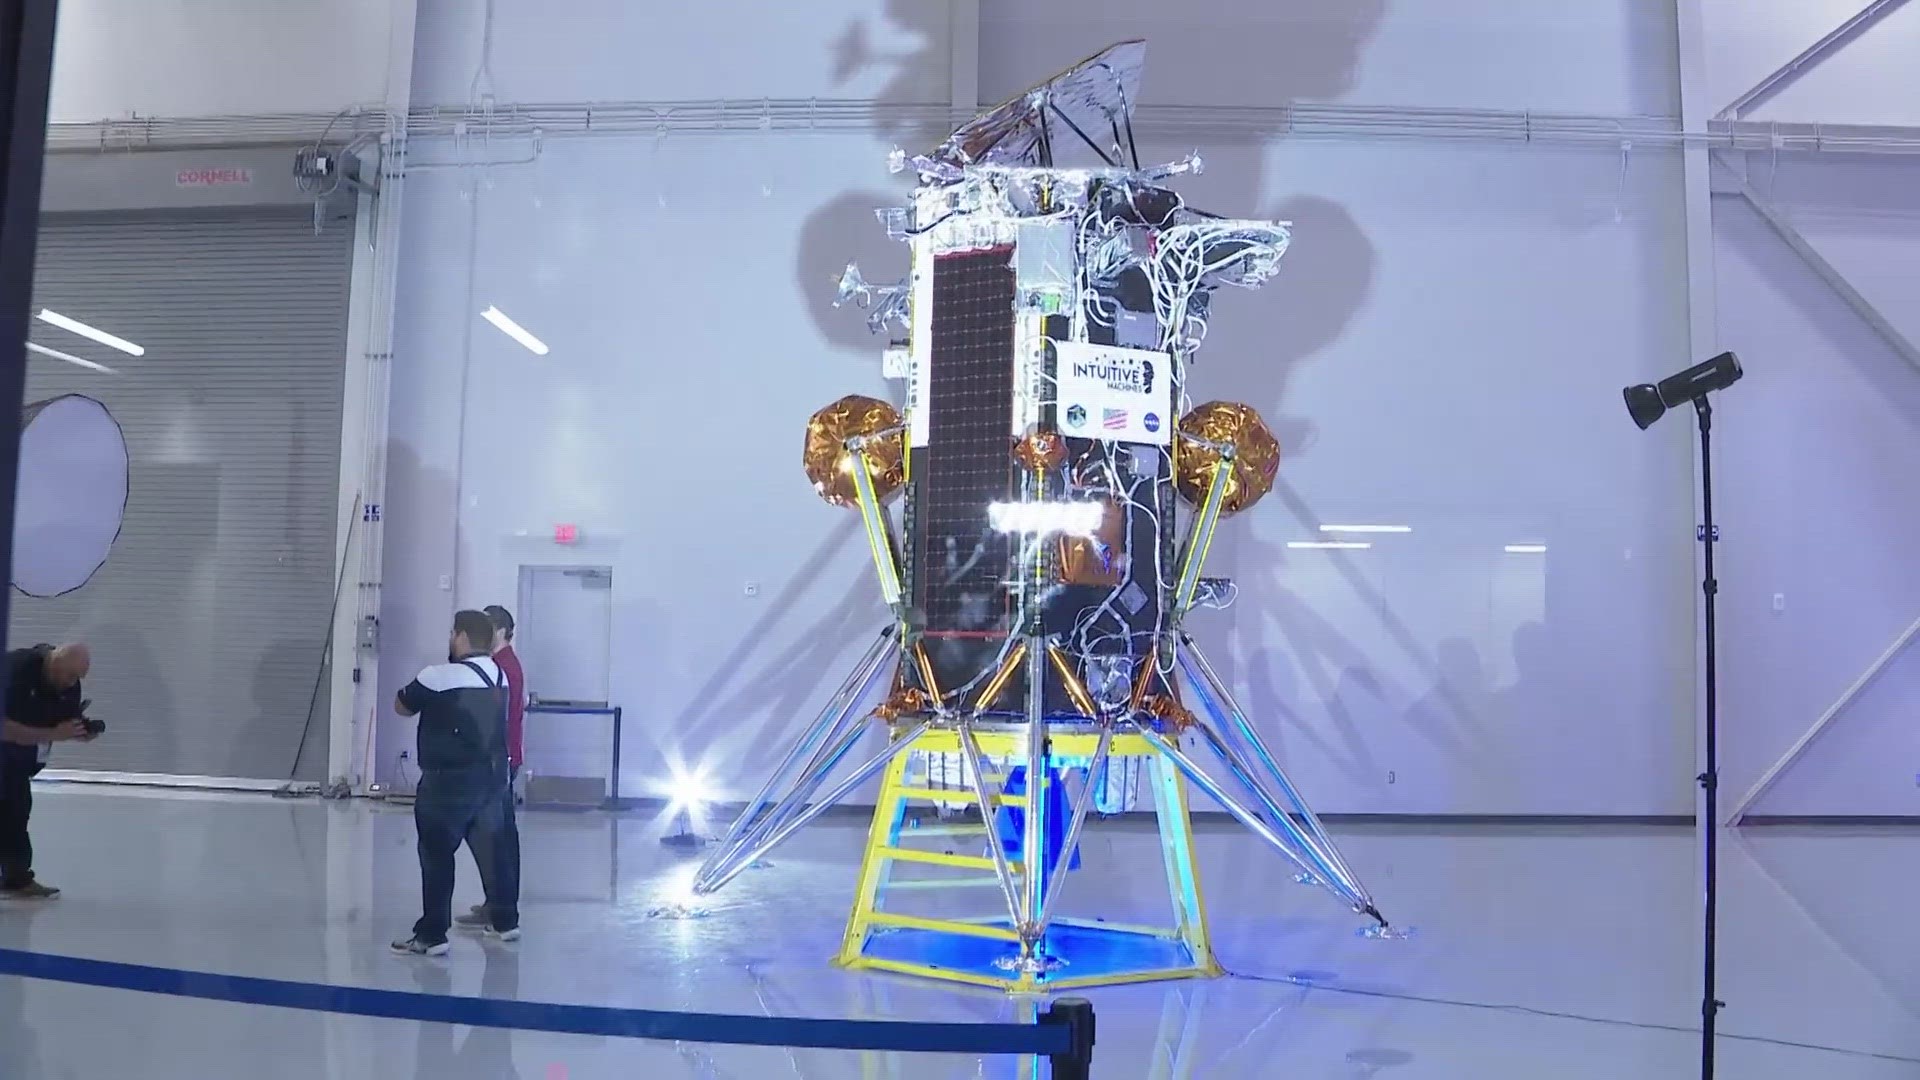 It took 200 engineers, 4 years and $100 million to build this prototype. This is the first of three lunar landers.